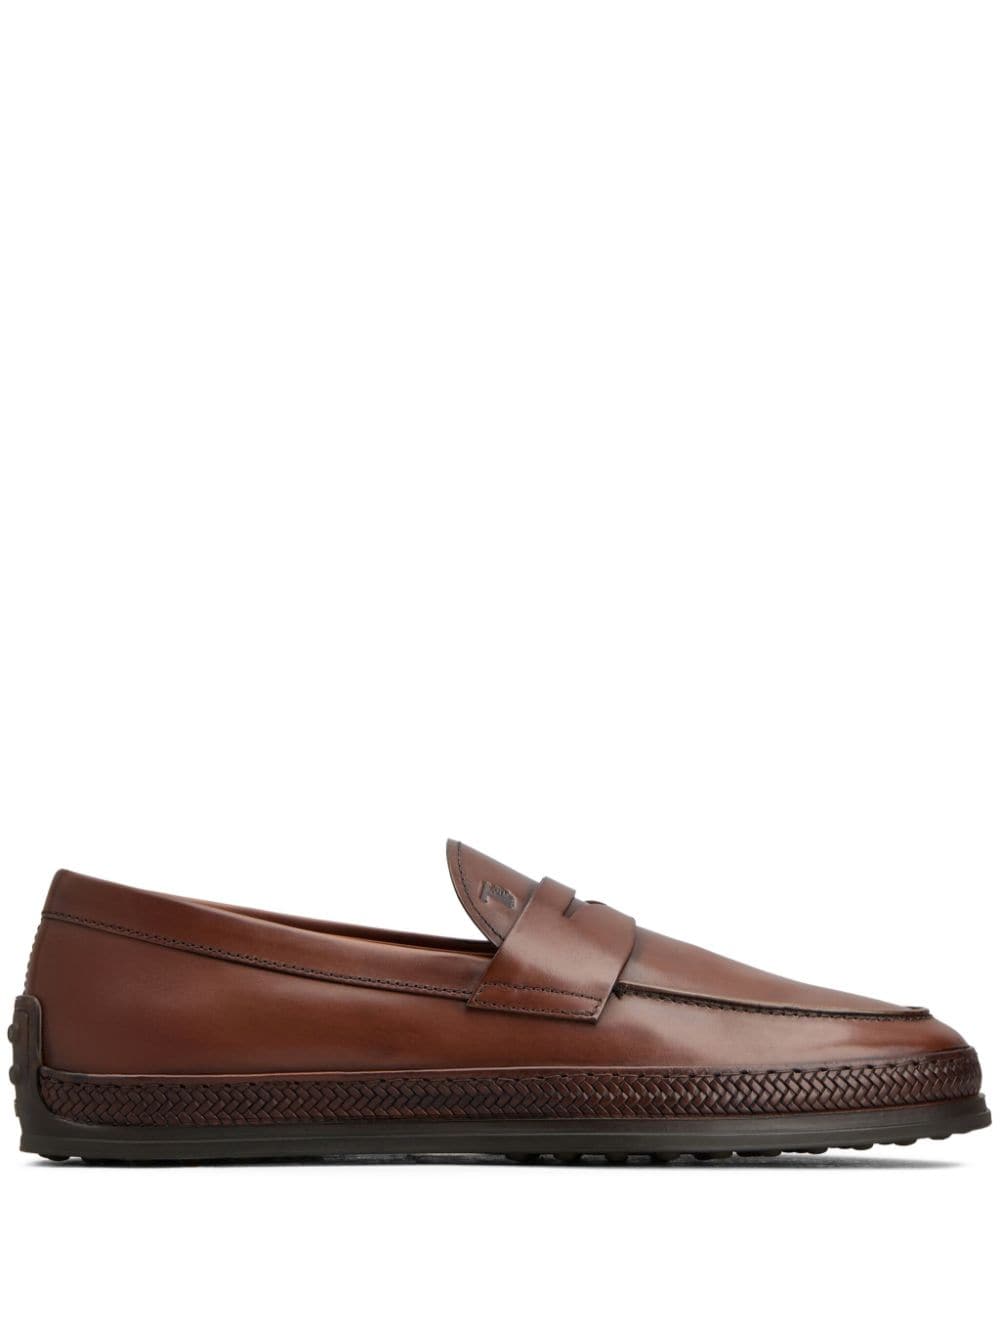 Tod's Gomma leather mocassin loafers - Brown von Tod's